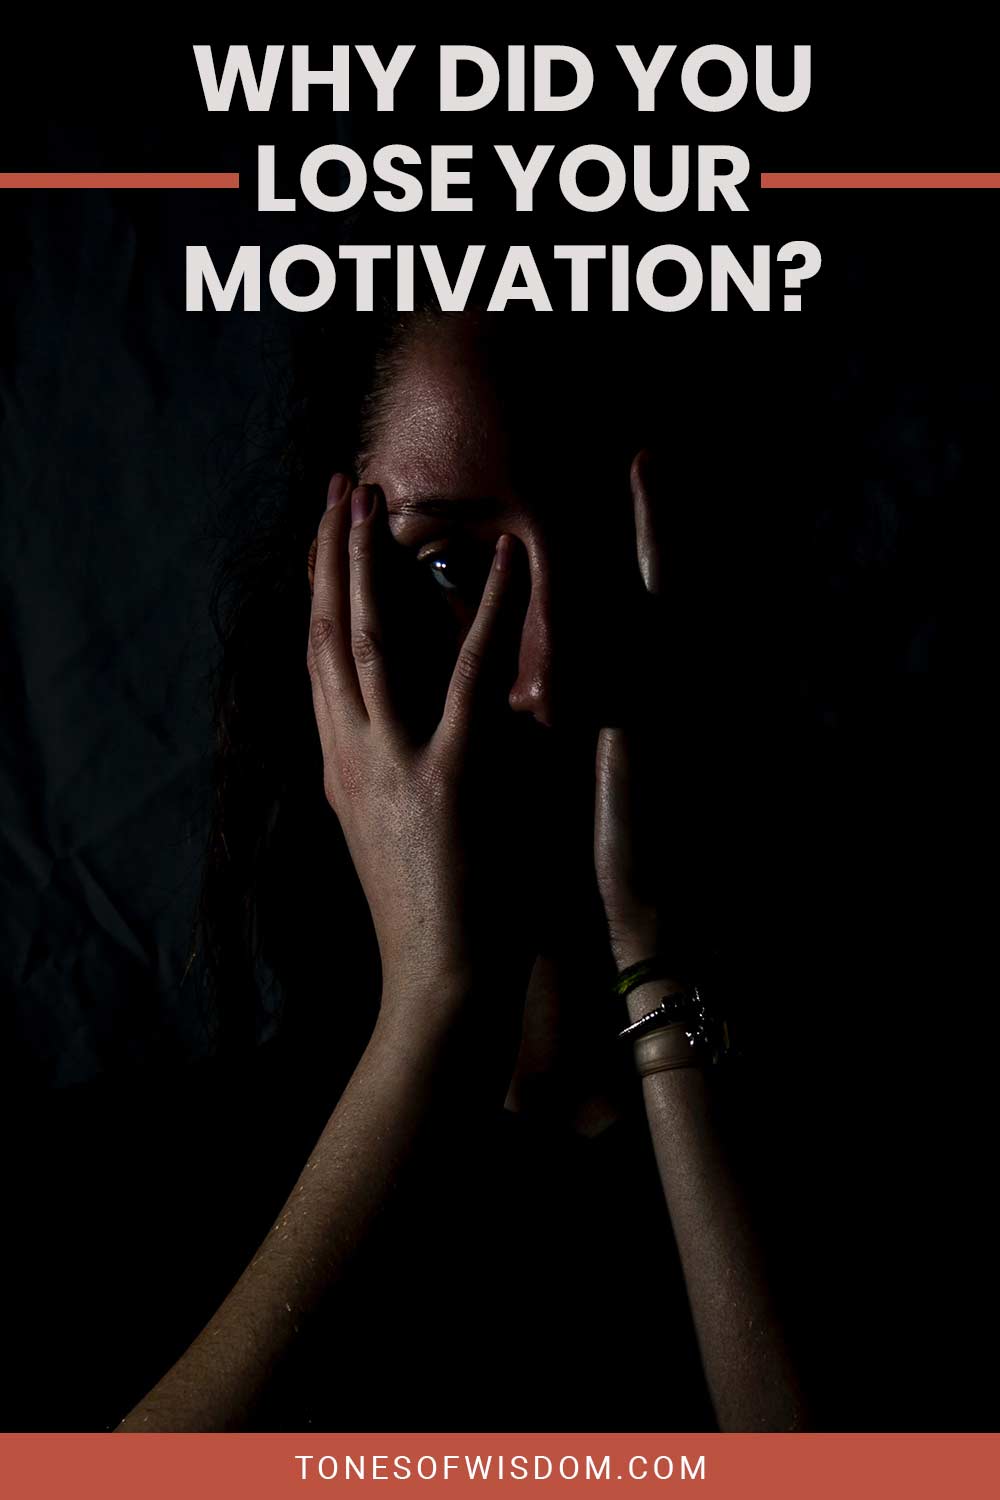 Why Did You Lose Your Motivation?